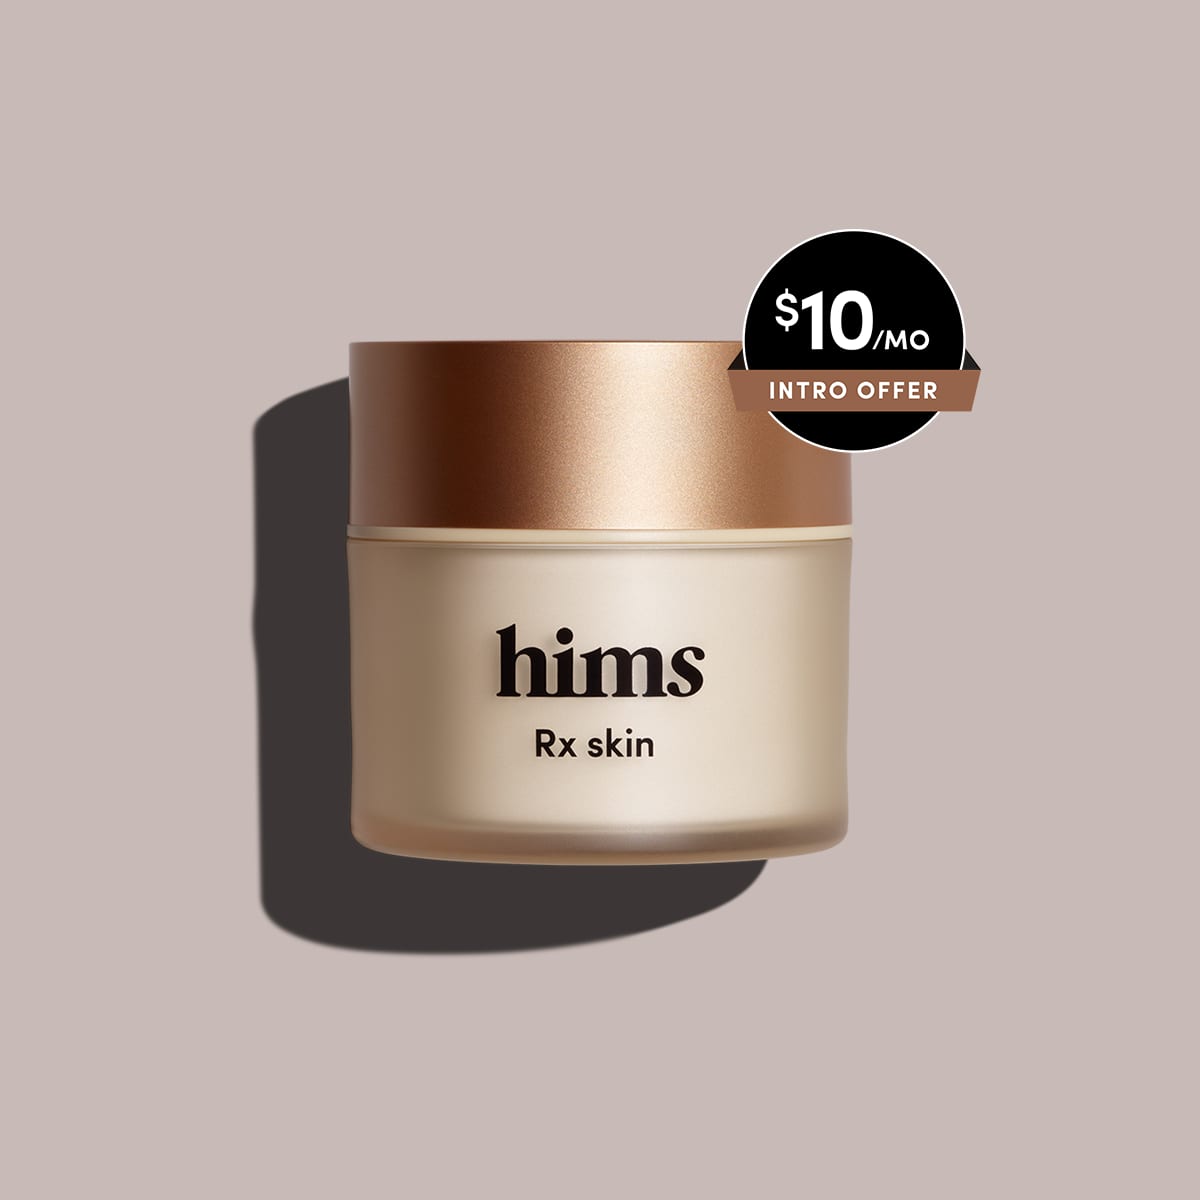 Hims acne cream product packaging